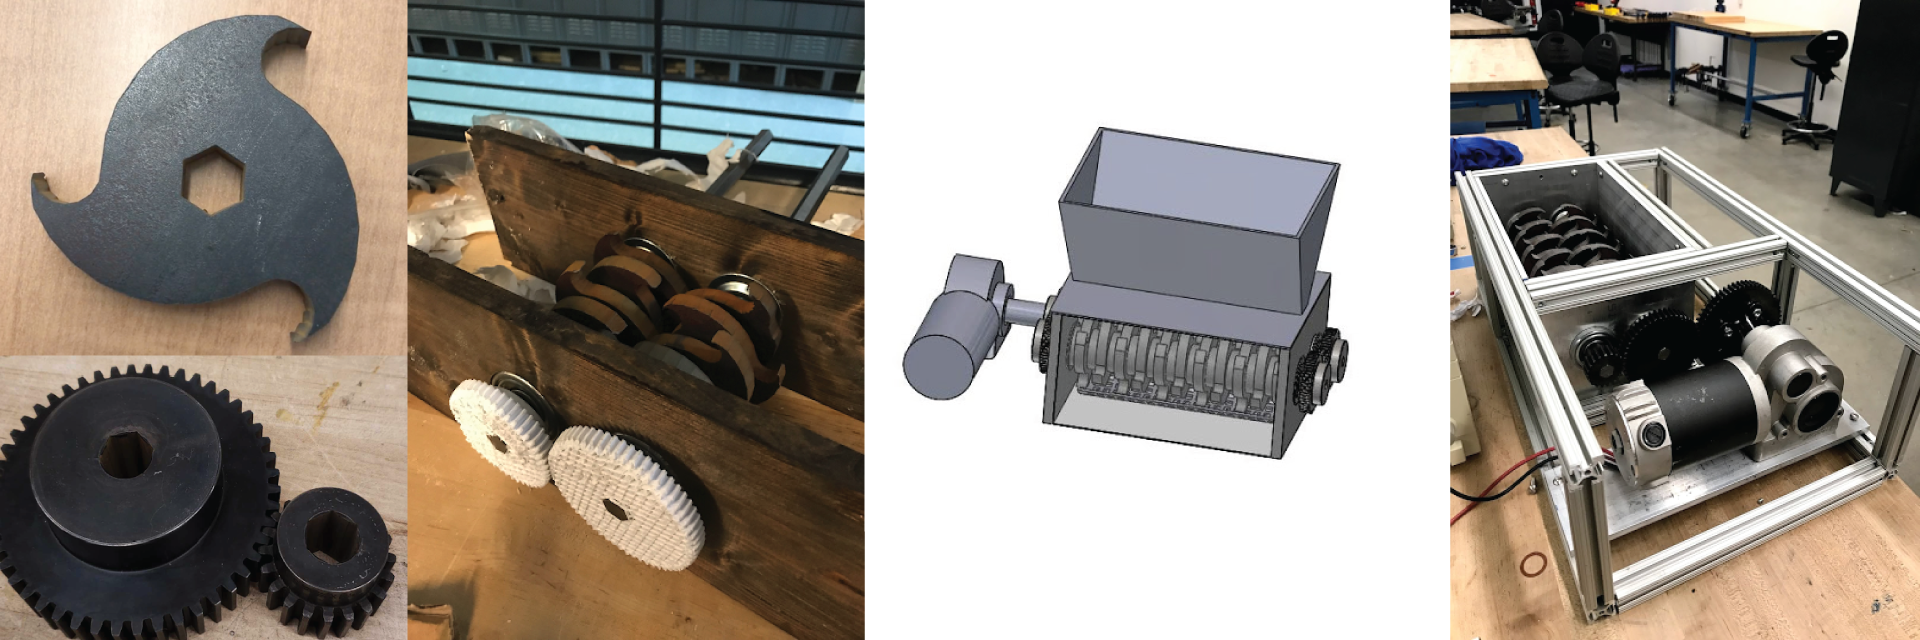 Photos of the blade detailing, prototype, CAD model, and final model of a large shredding machine. 